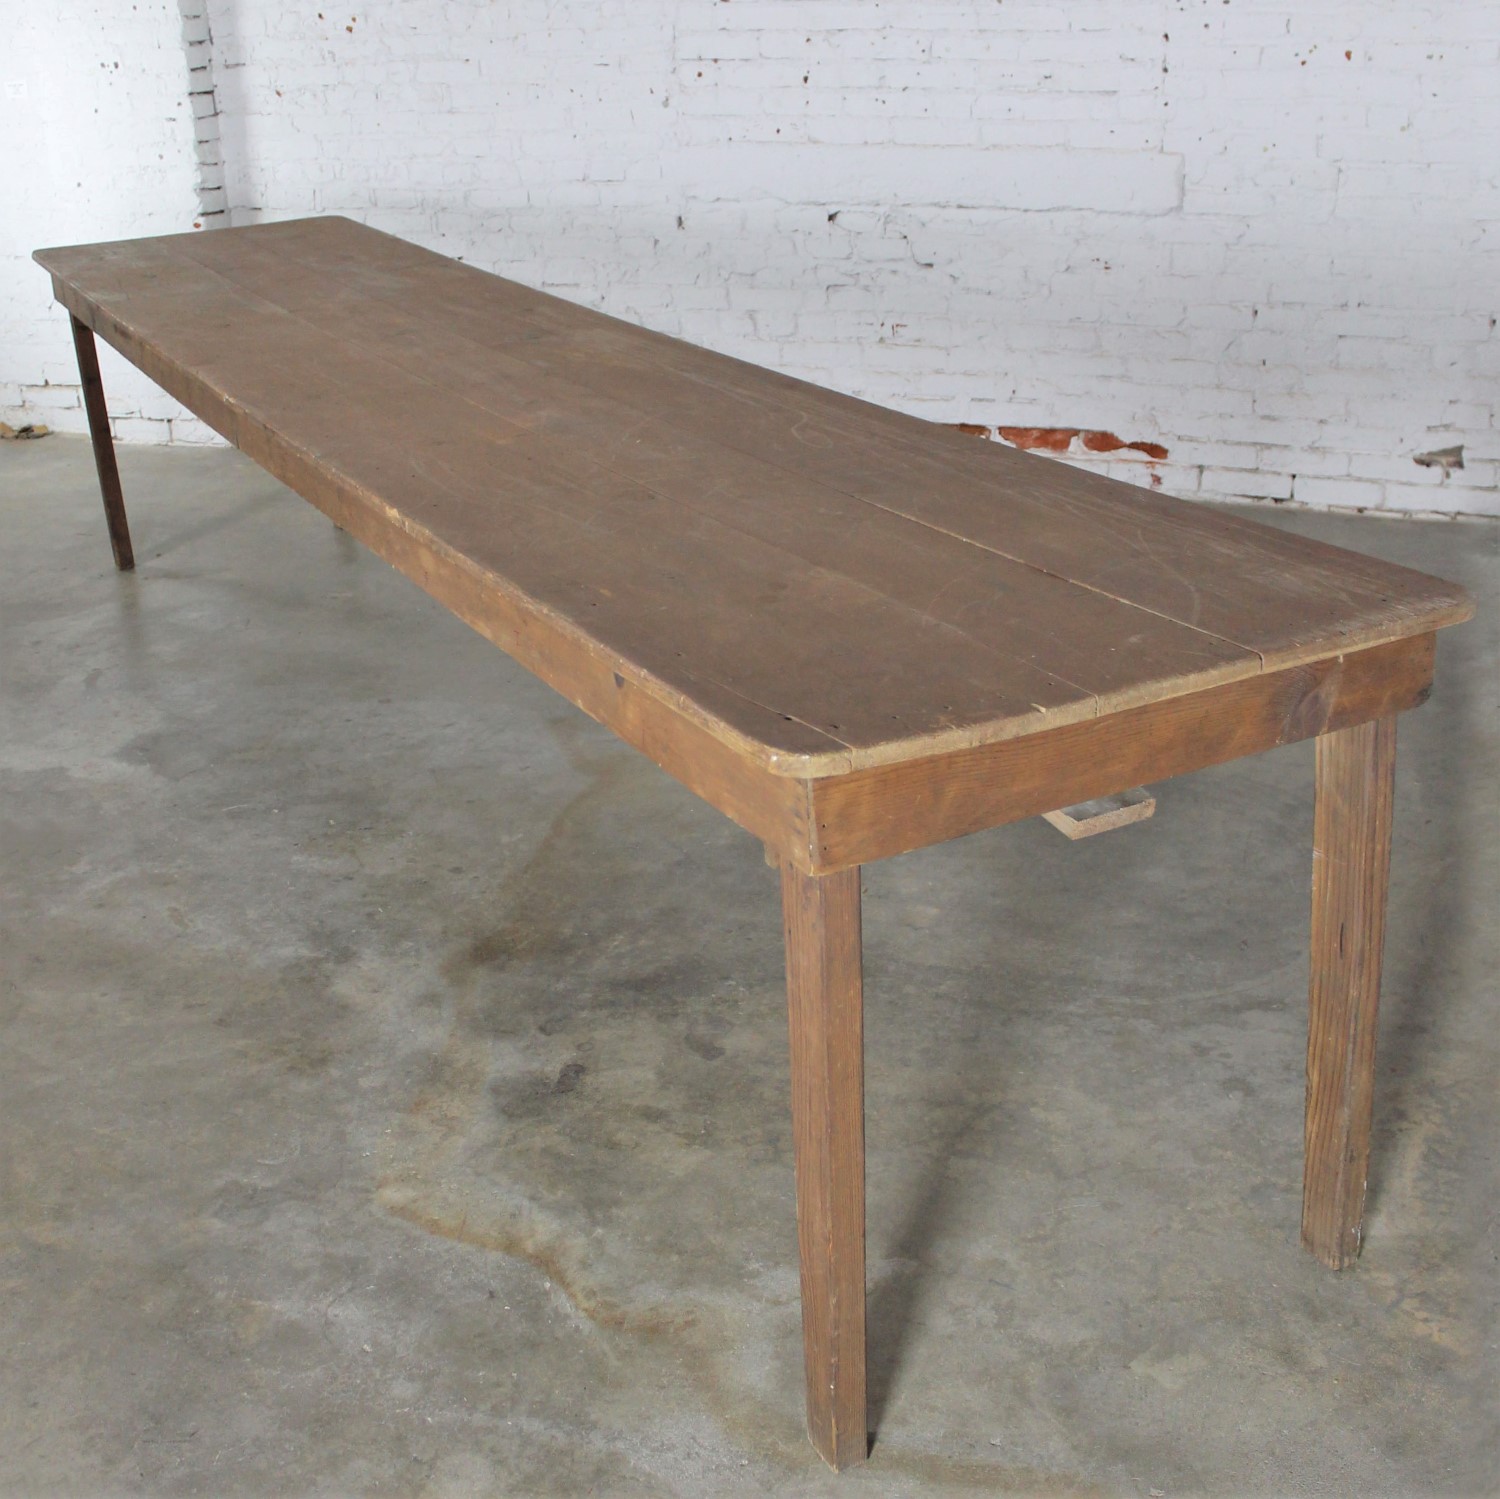 Antique Primitive Pine Harvest Table Extra Long 144 Inches